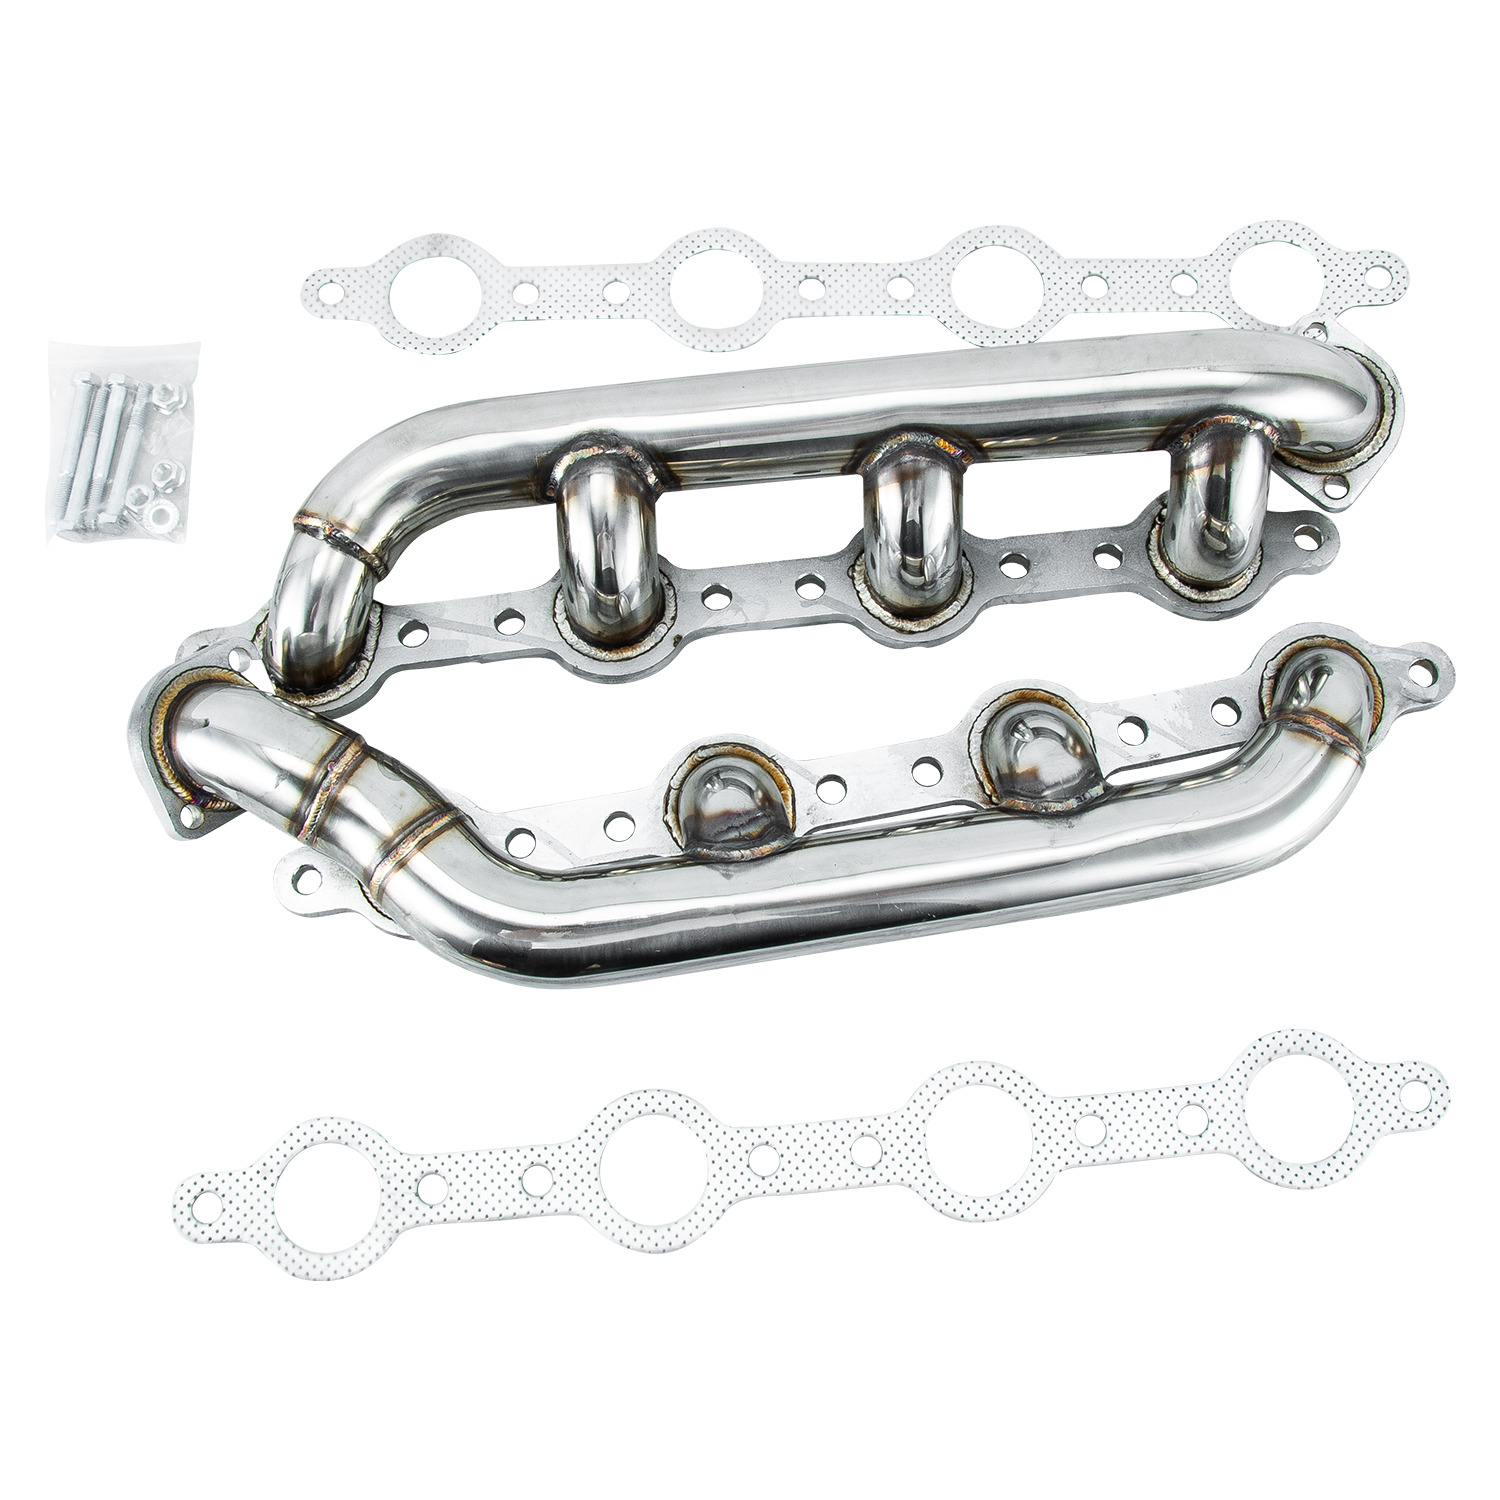 Stainless Steel Headers Manifold Fits Ford F250 F350 F450 7.3L Powerstroke 99-03